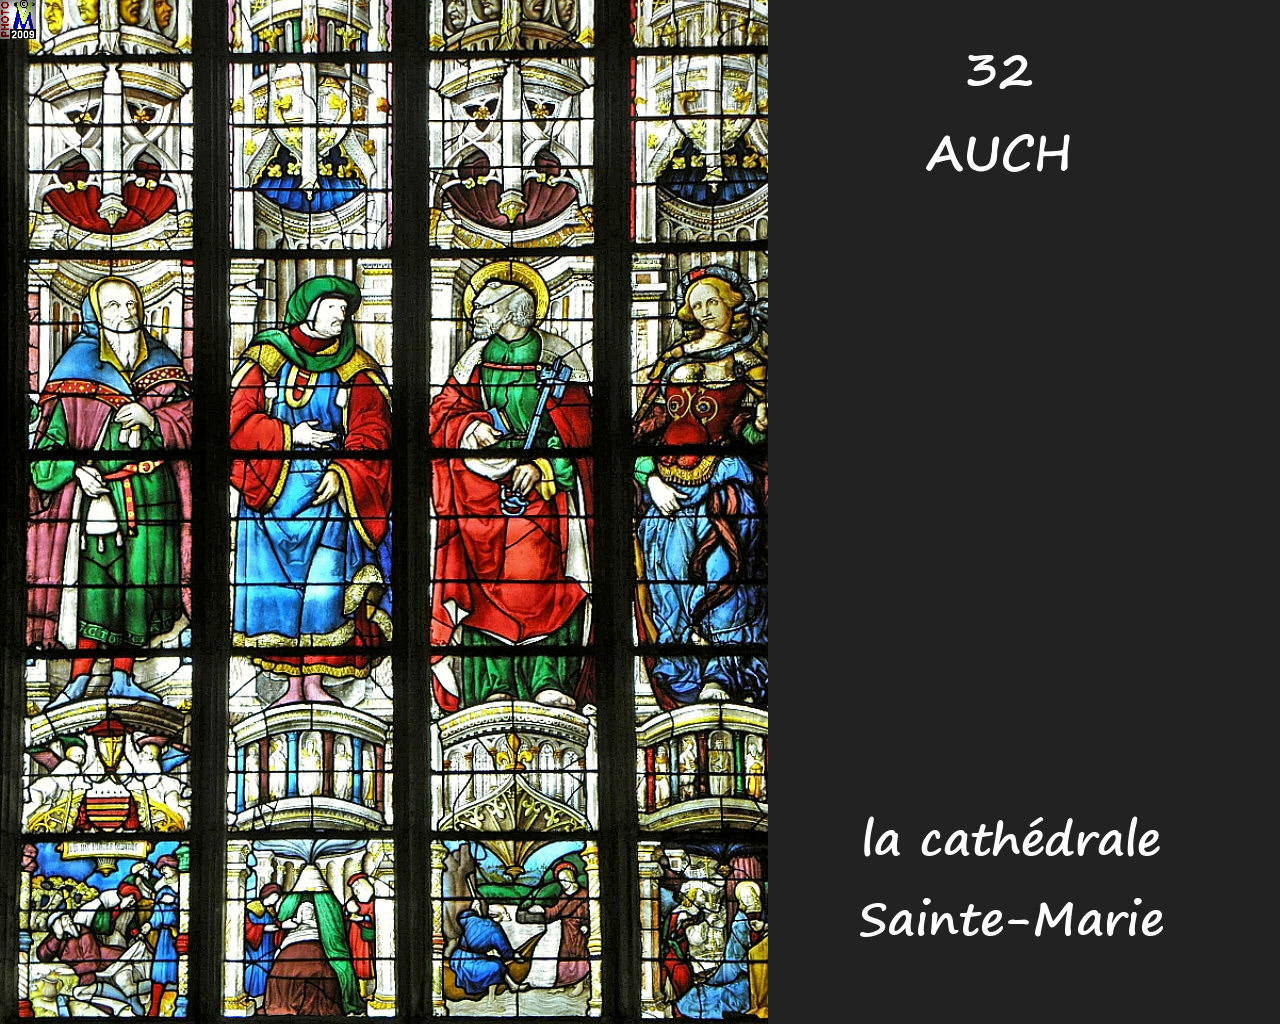 32AUCH_cathedrale_212.jpg